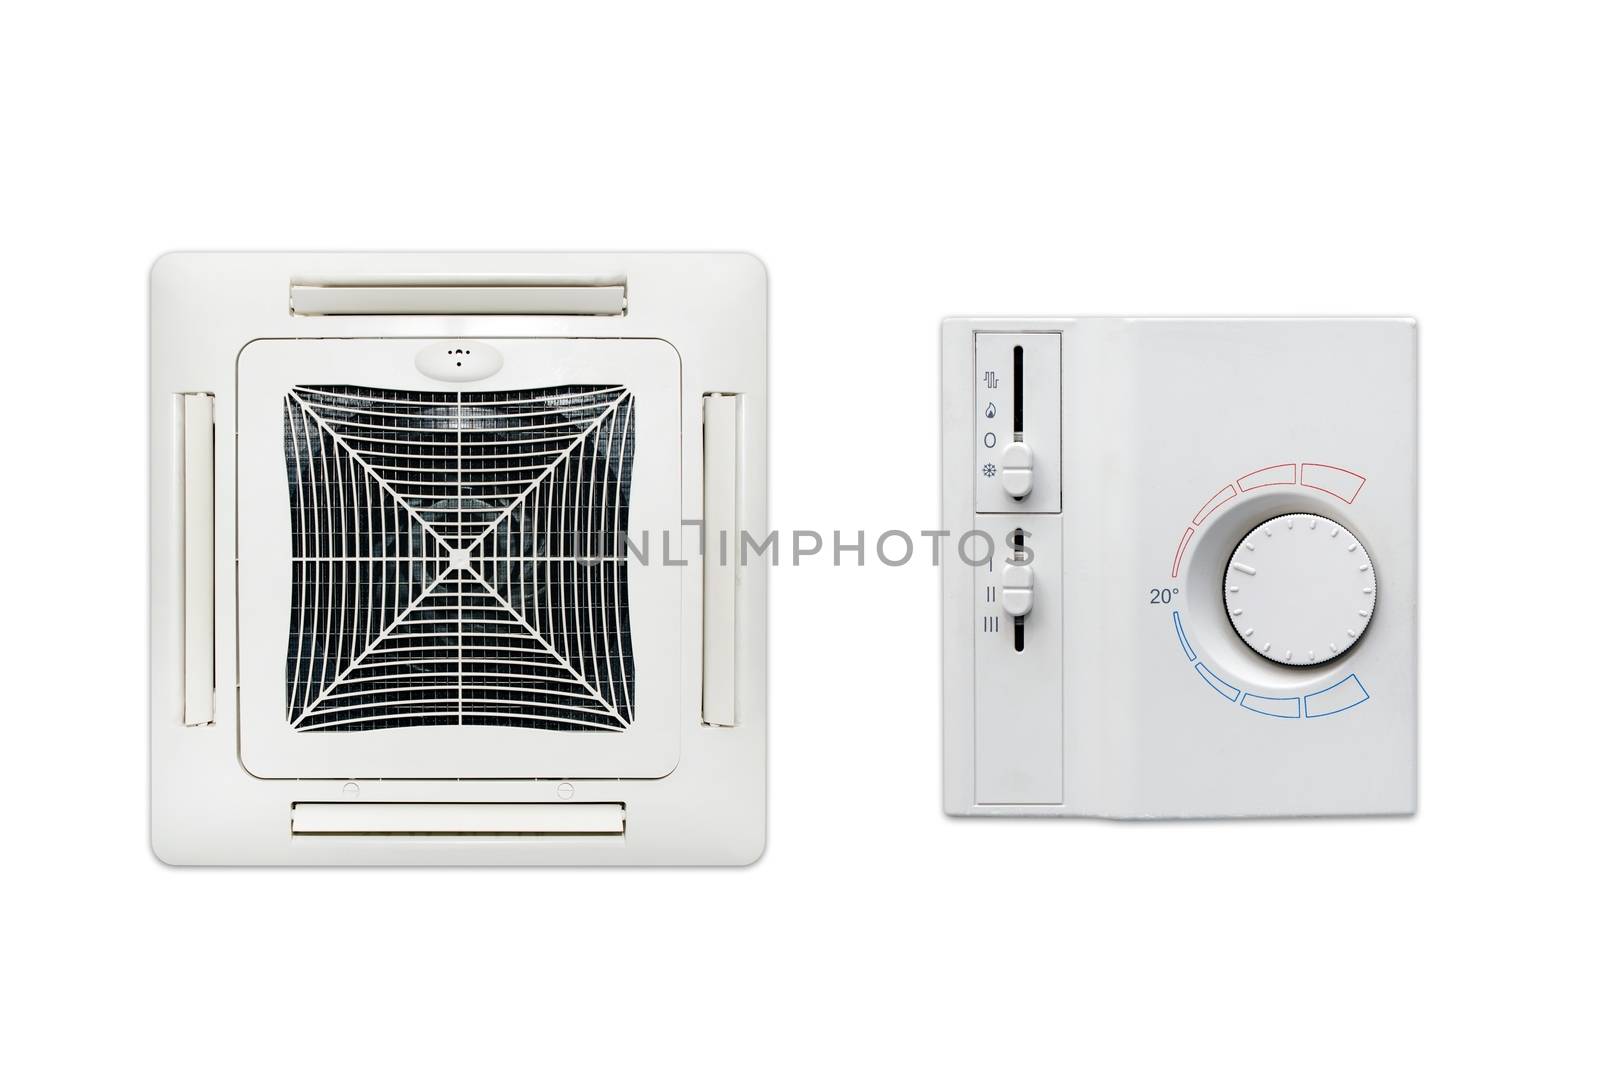 Ceiling air conditioner unit and thermostat set isolated on white background